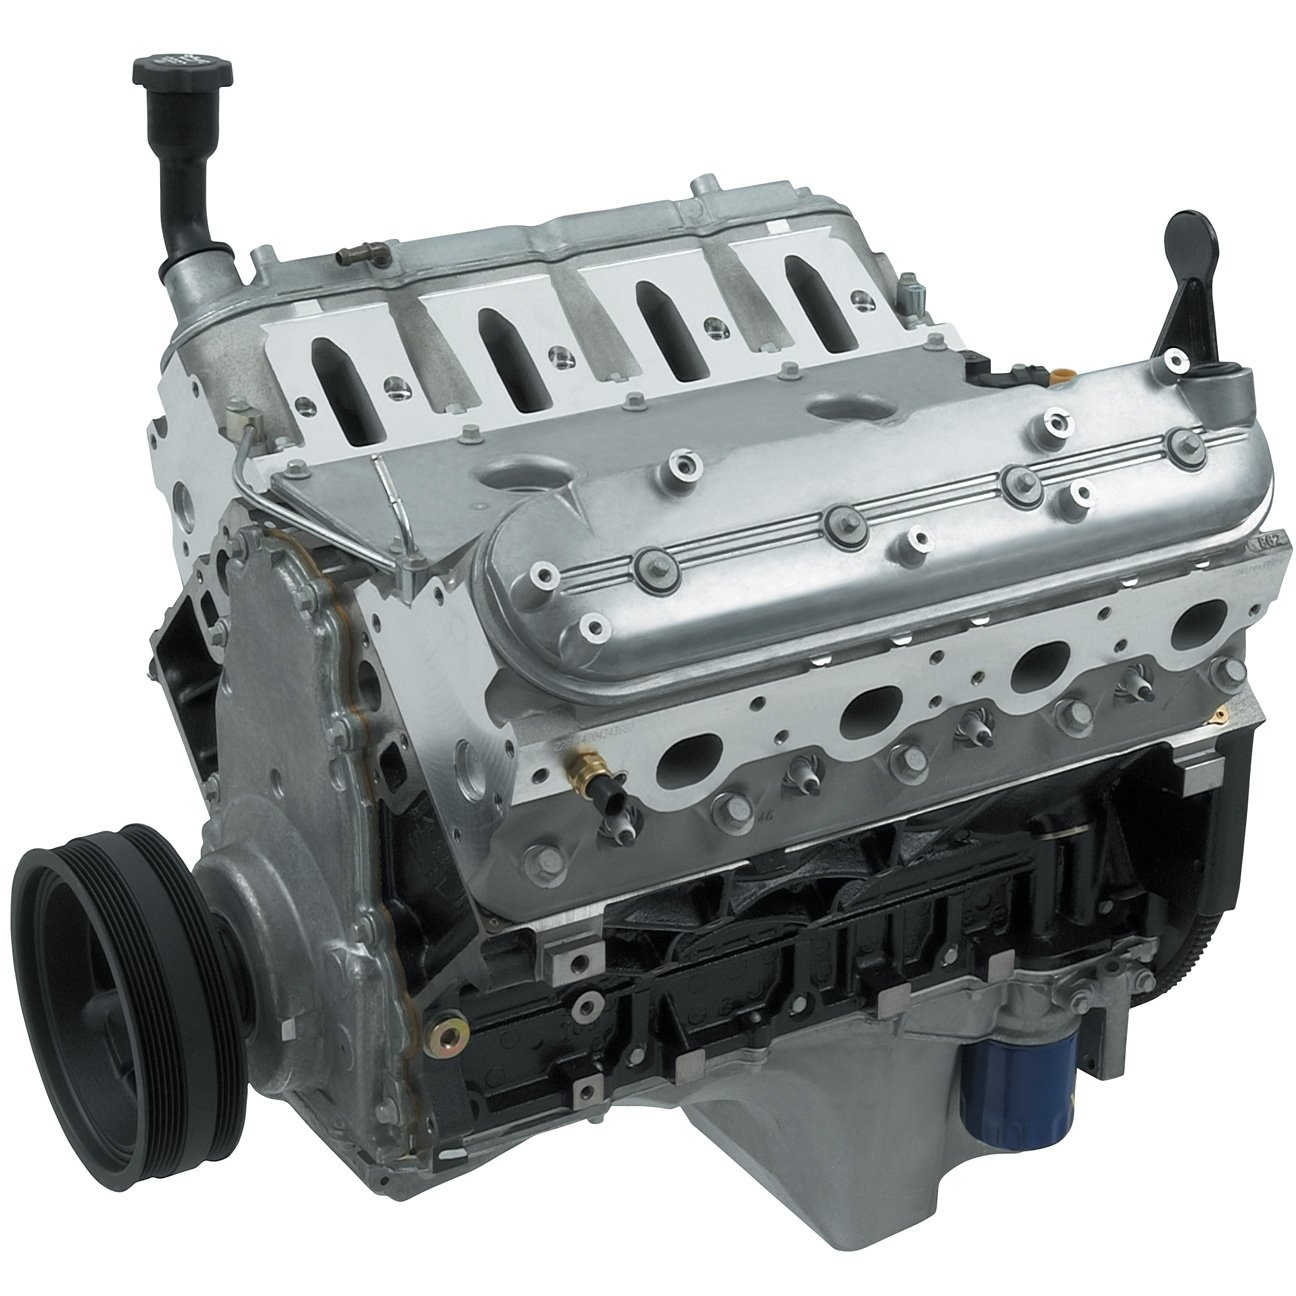 GM Goodwrench 5.3L Crate Engine 2001-04 GM Truck/SUV/Van